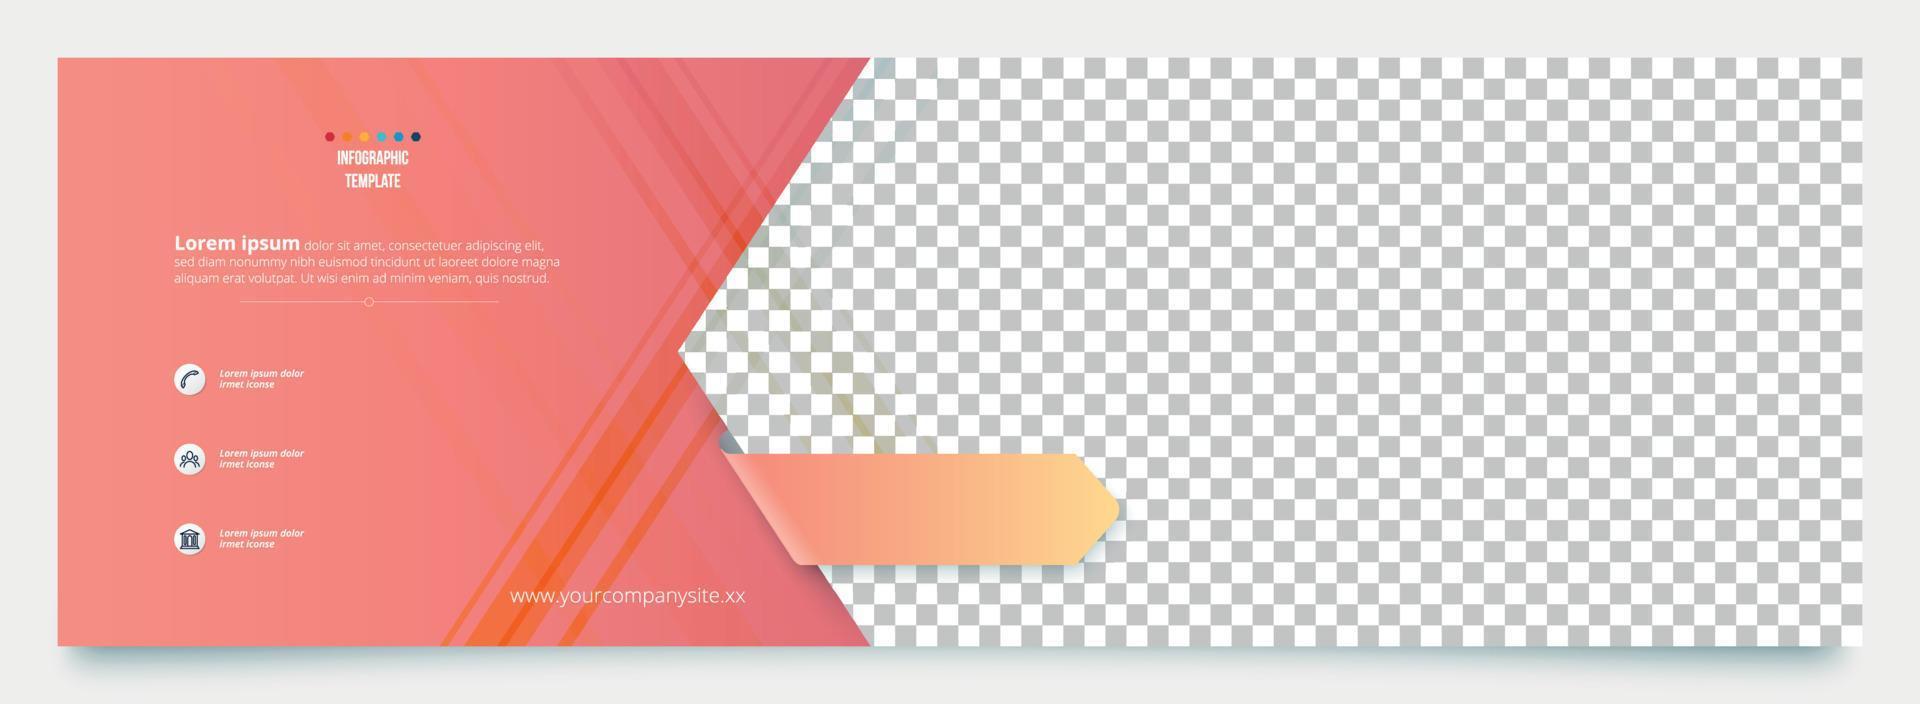 Business abstract banner design template. vector